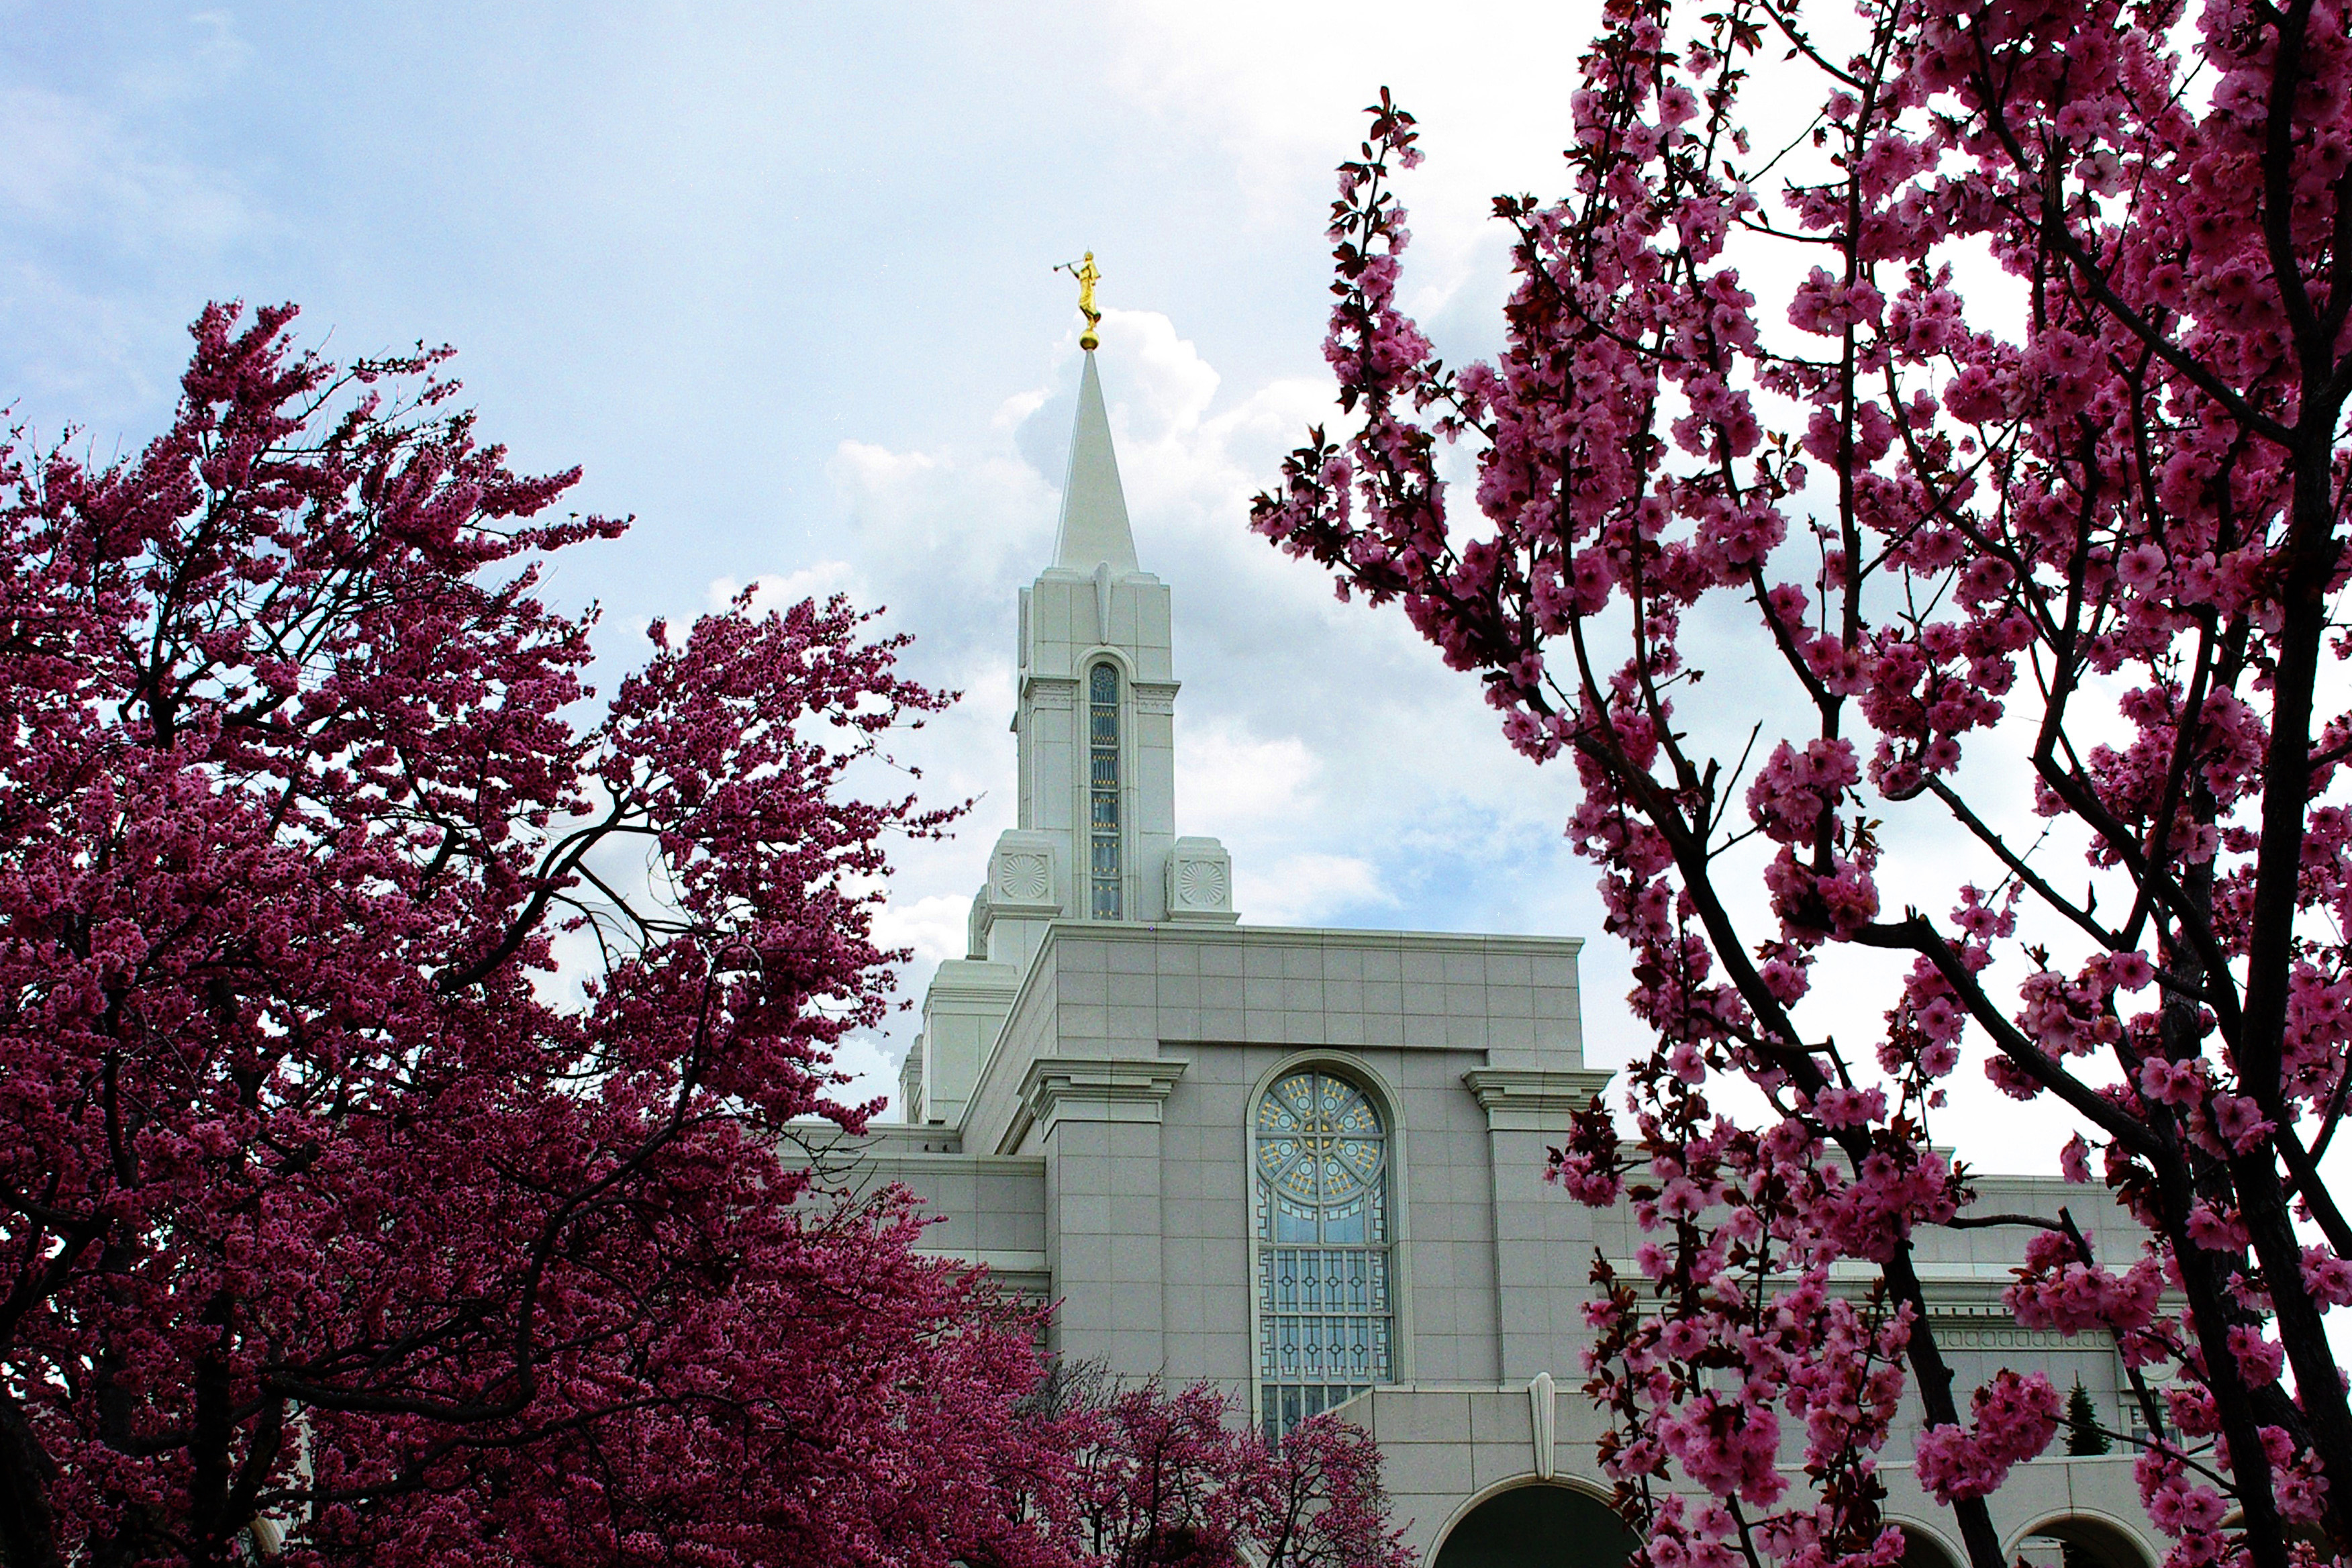 The front of the Bountiful Utah Temple, seen between tree branches with pink blossoms.